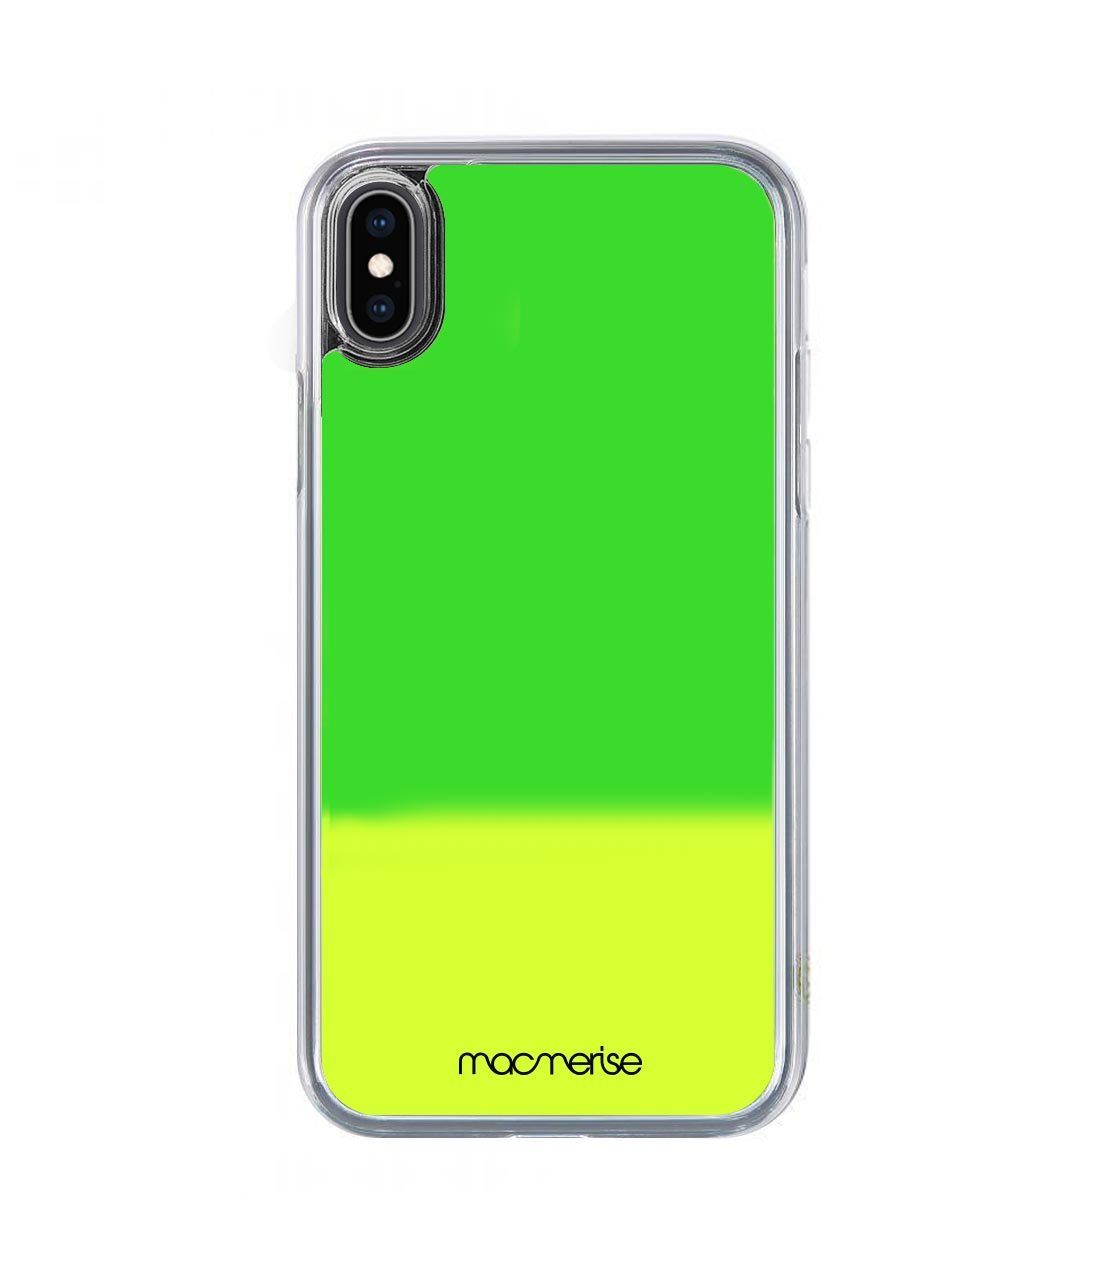 Neon Sand Green - Neon Sand Phone Case for iPhone XS Max